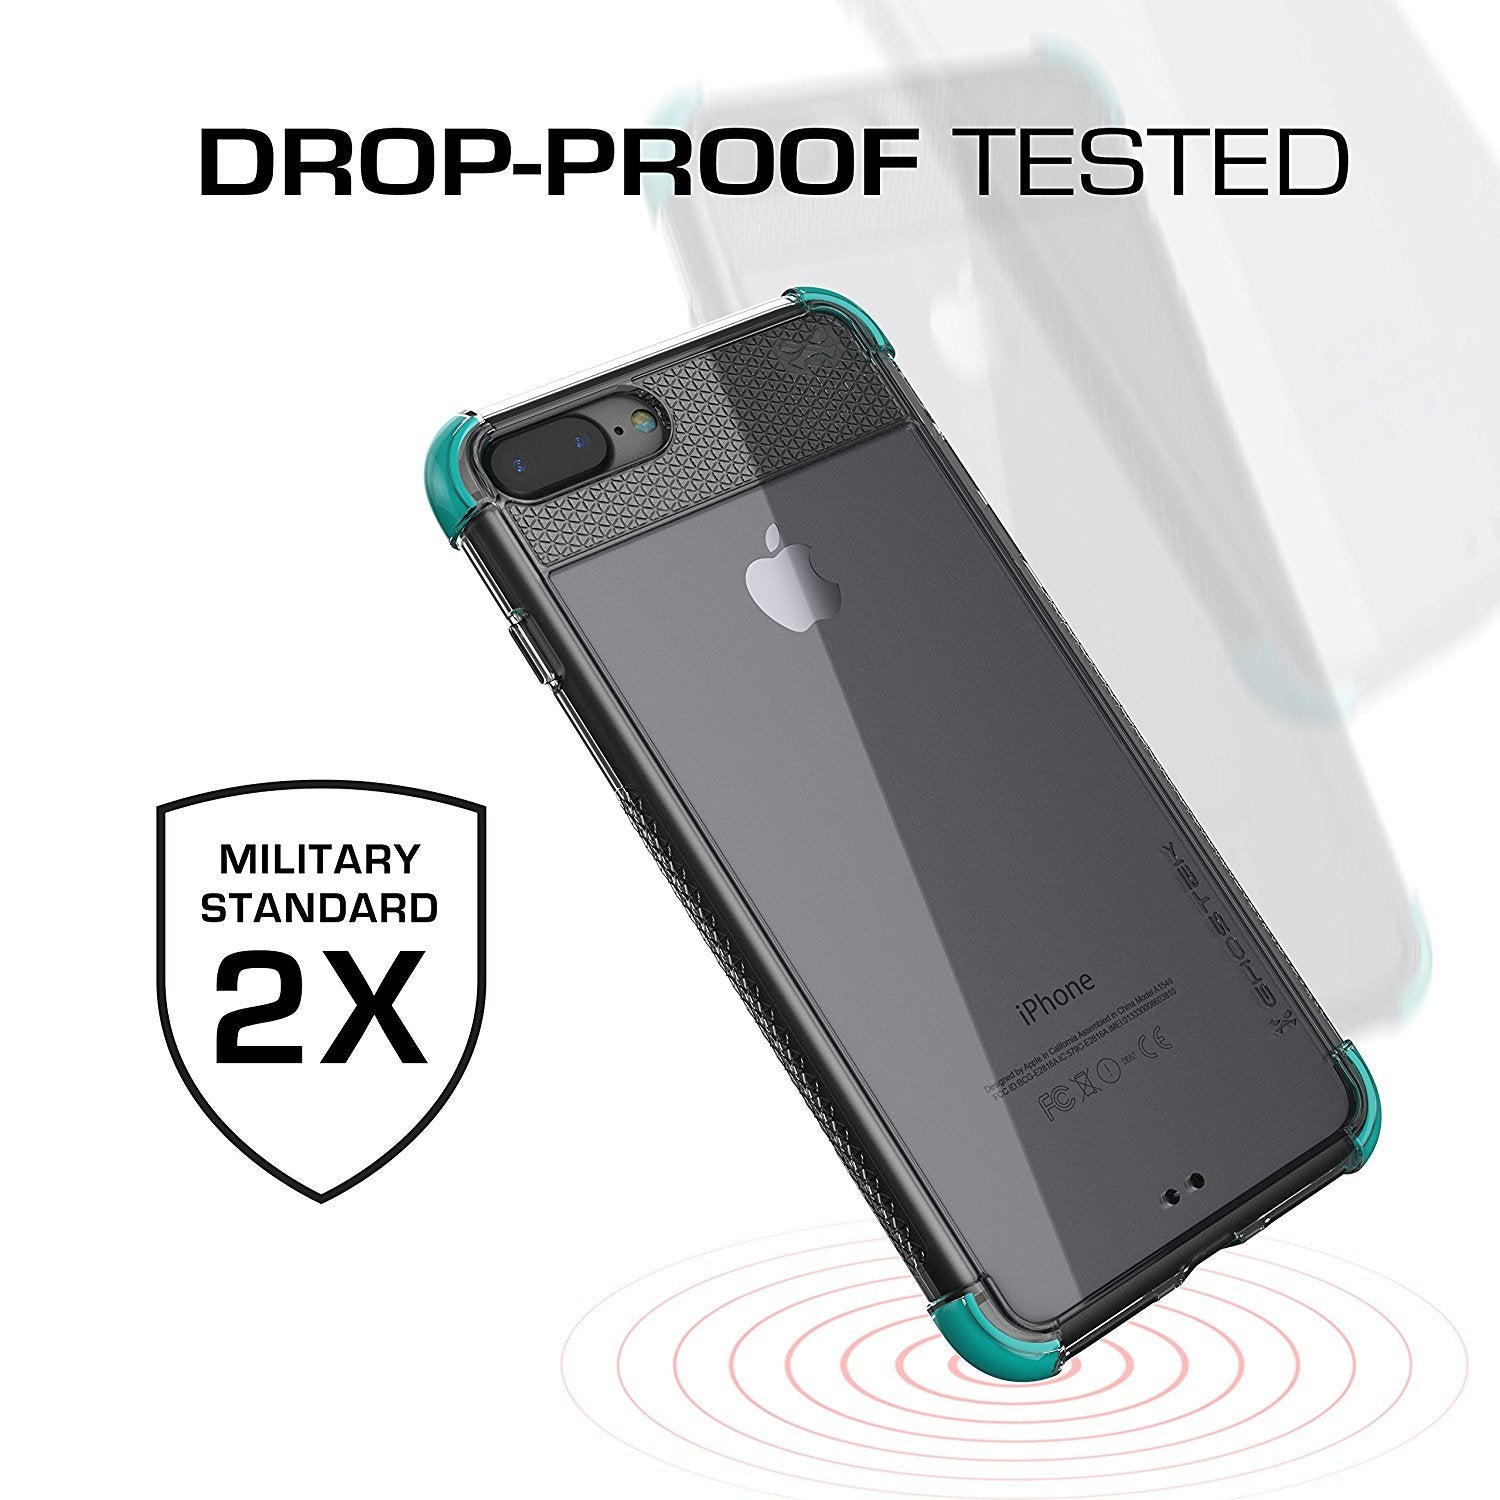 iPhone 8+ Plus Case, Ghostek Covert 2 Series for iPhone 8+ Plus Protective Case [ Teal]